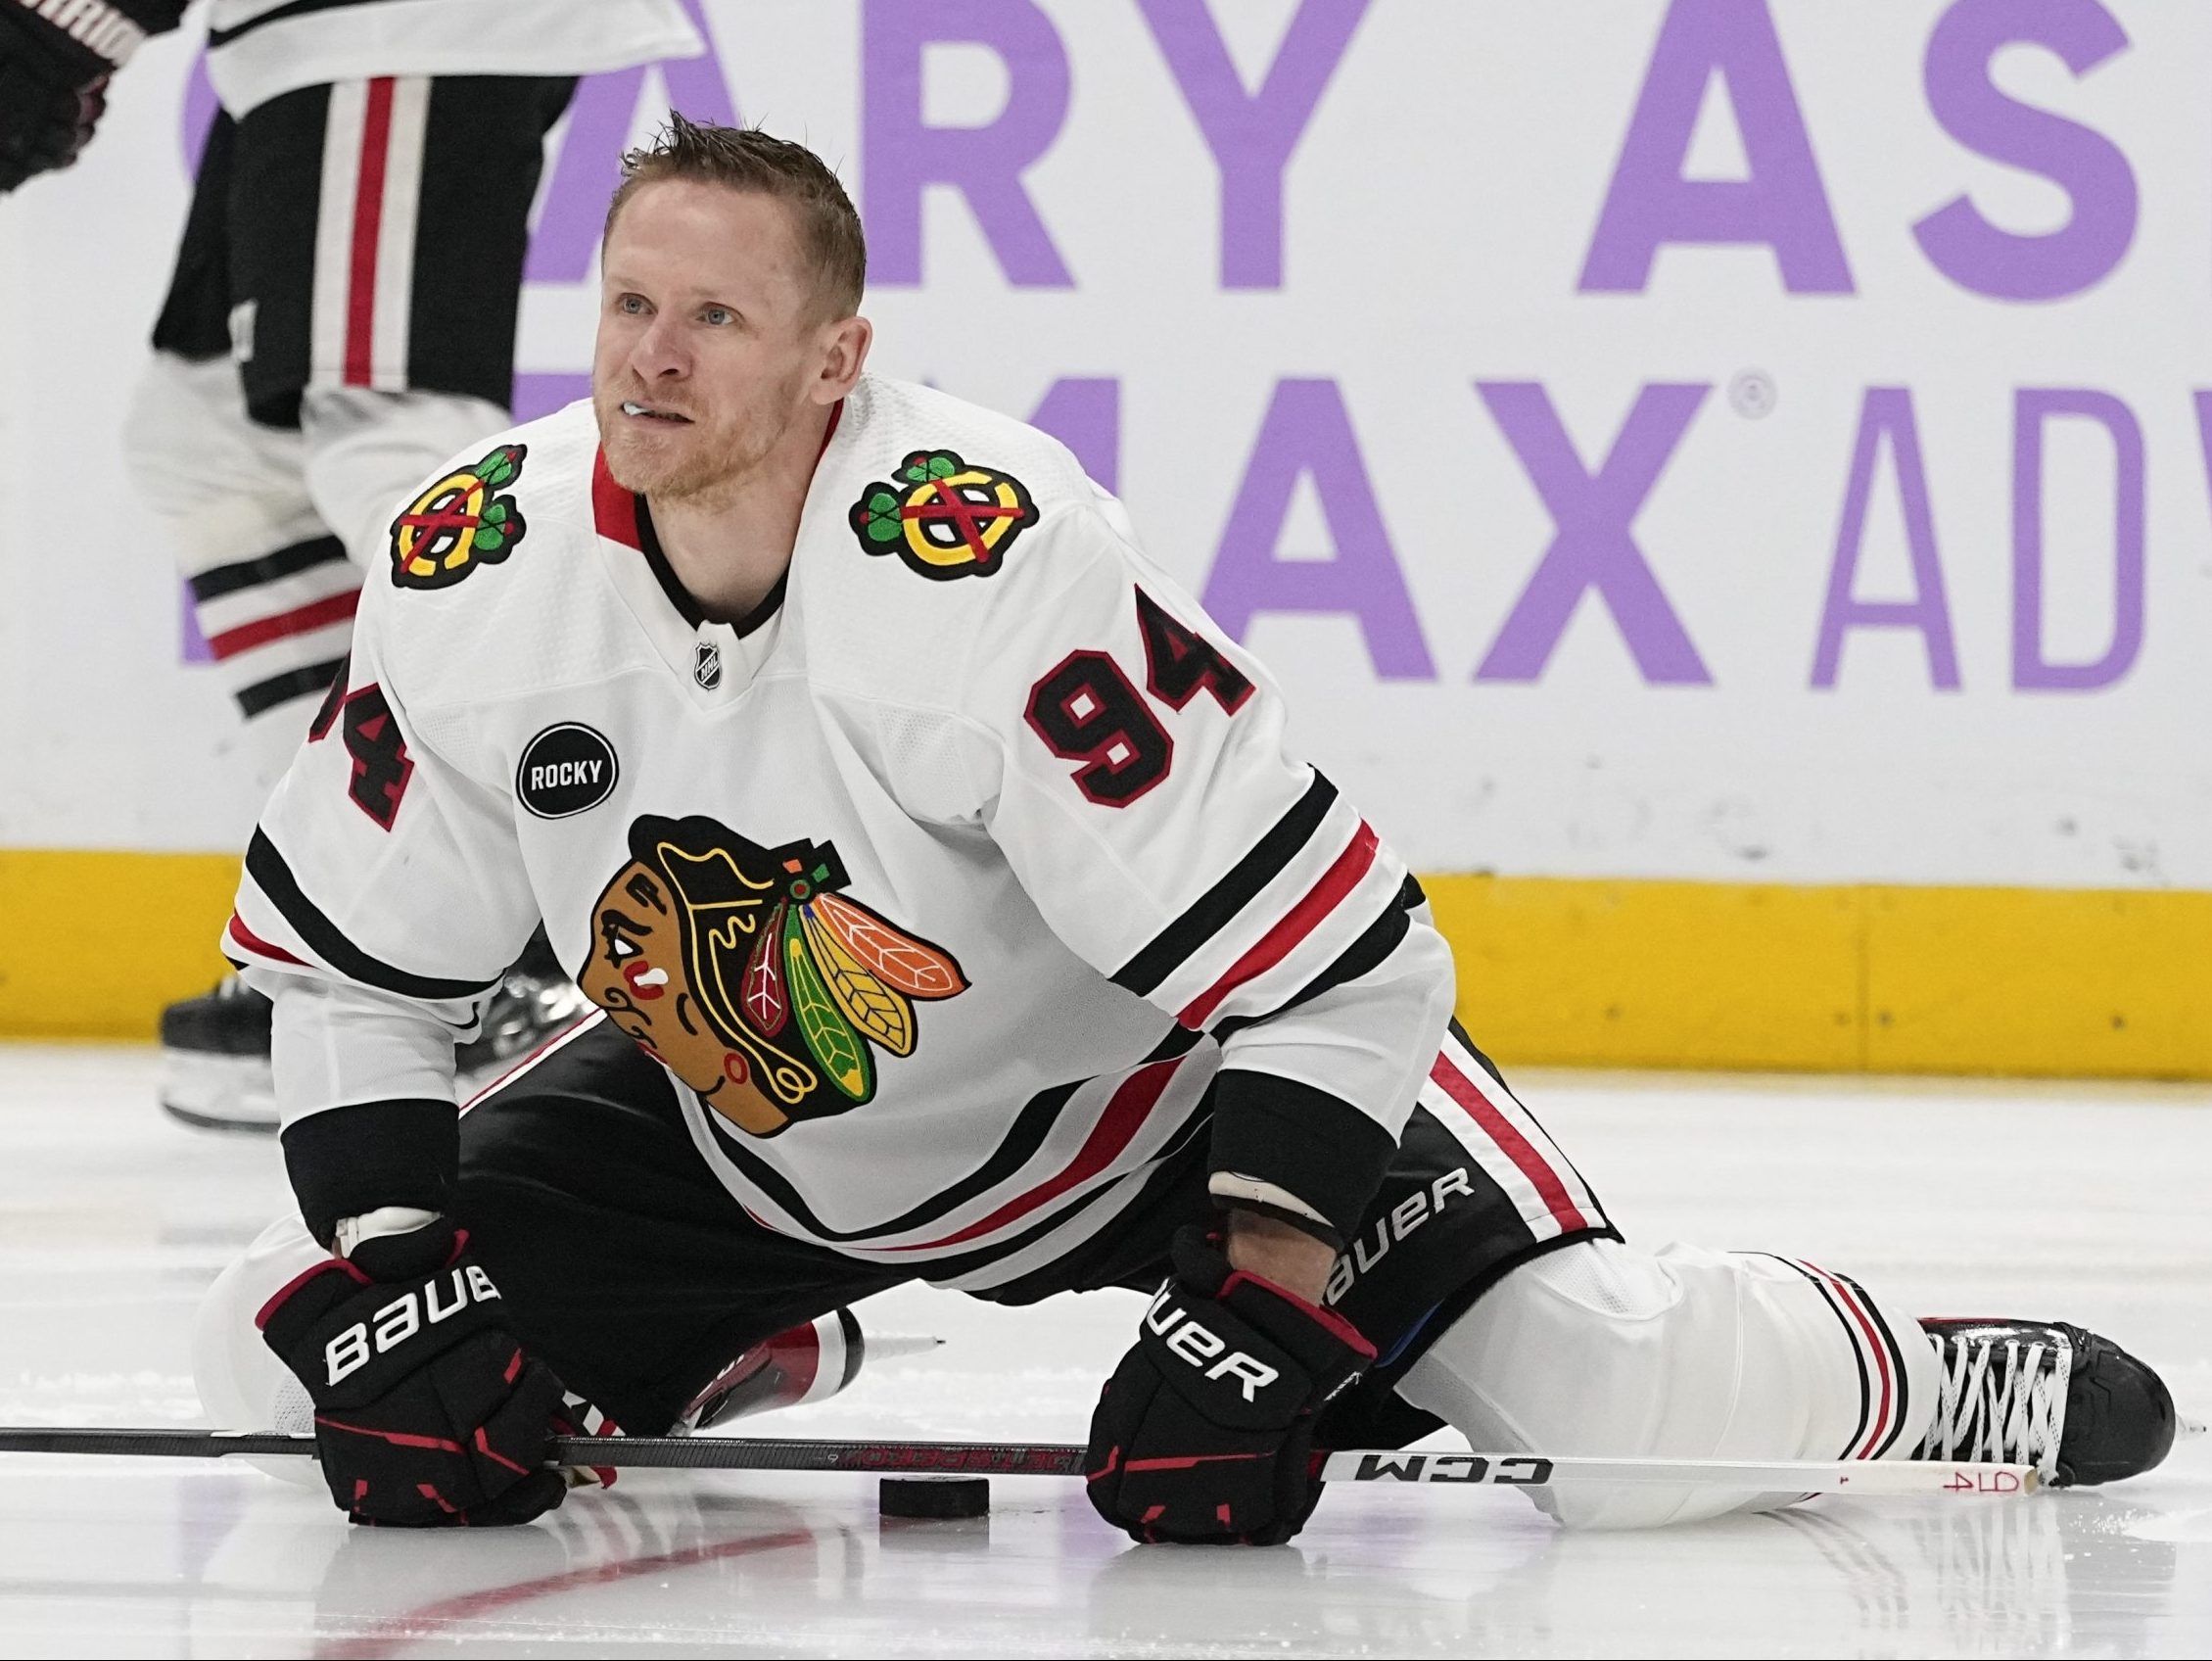 Corey Perry released by Chicago Blackhawks amidst team investigation